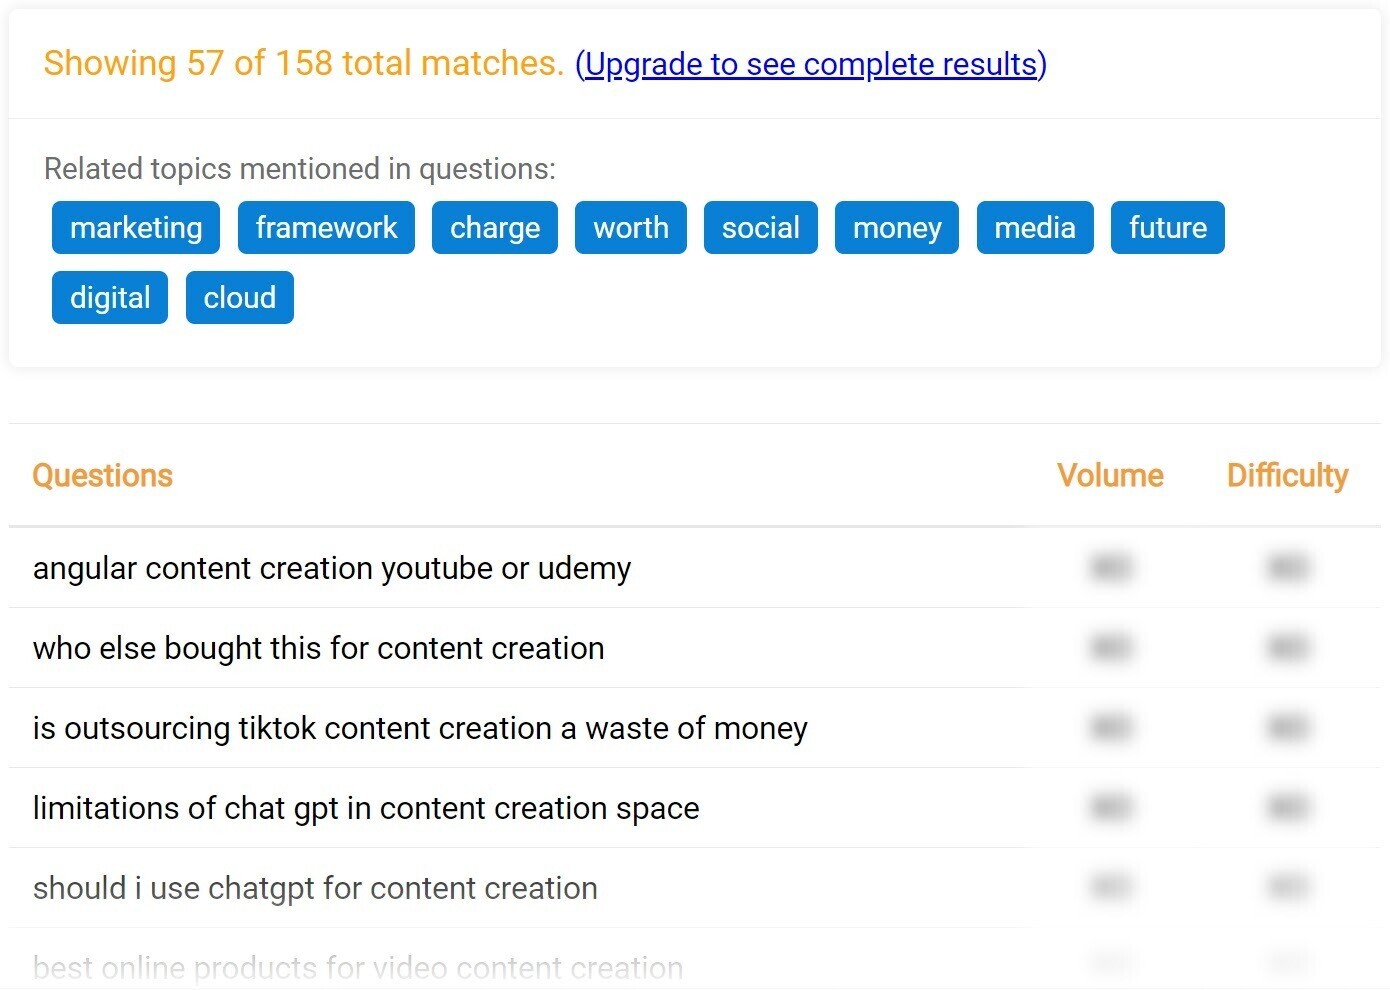 example of results for "content creation" in QuestionDB